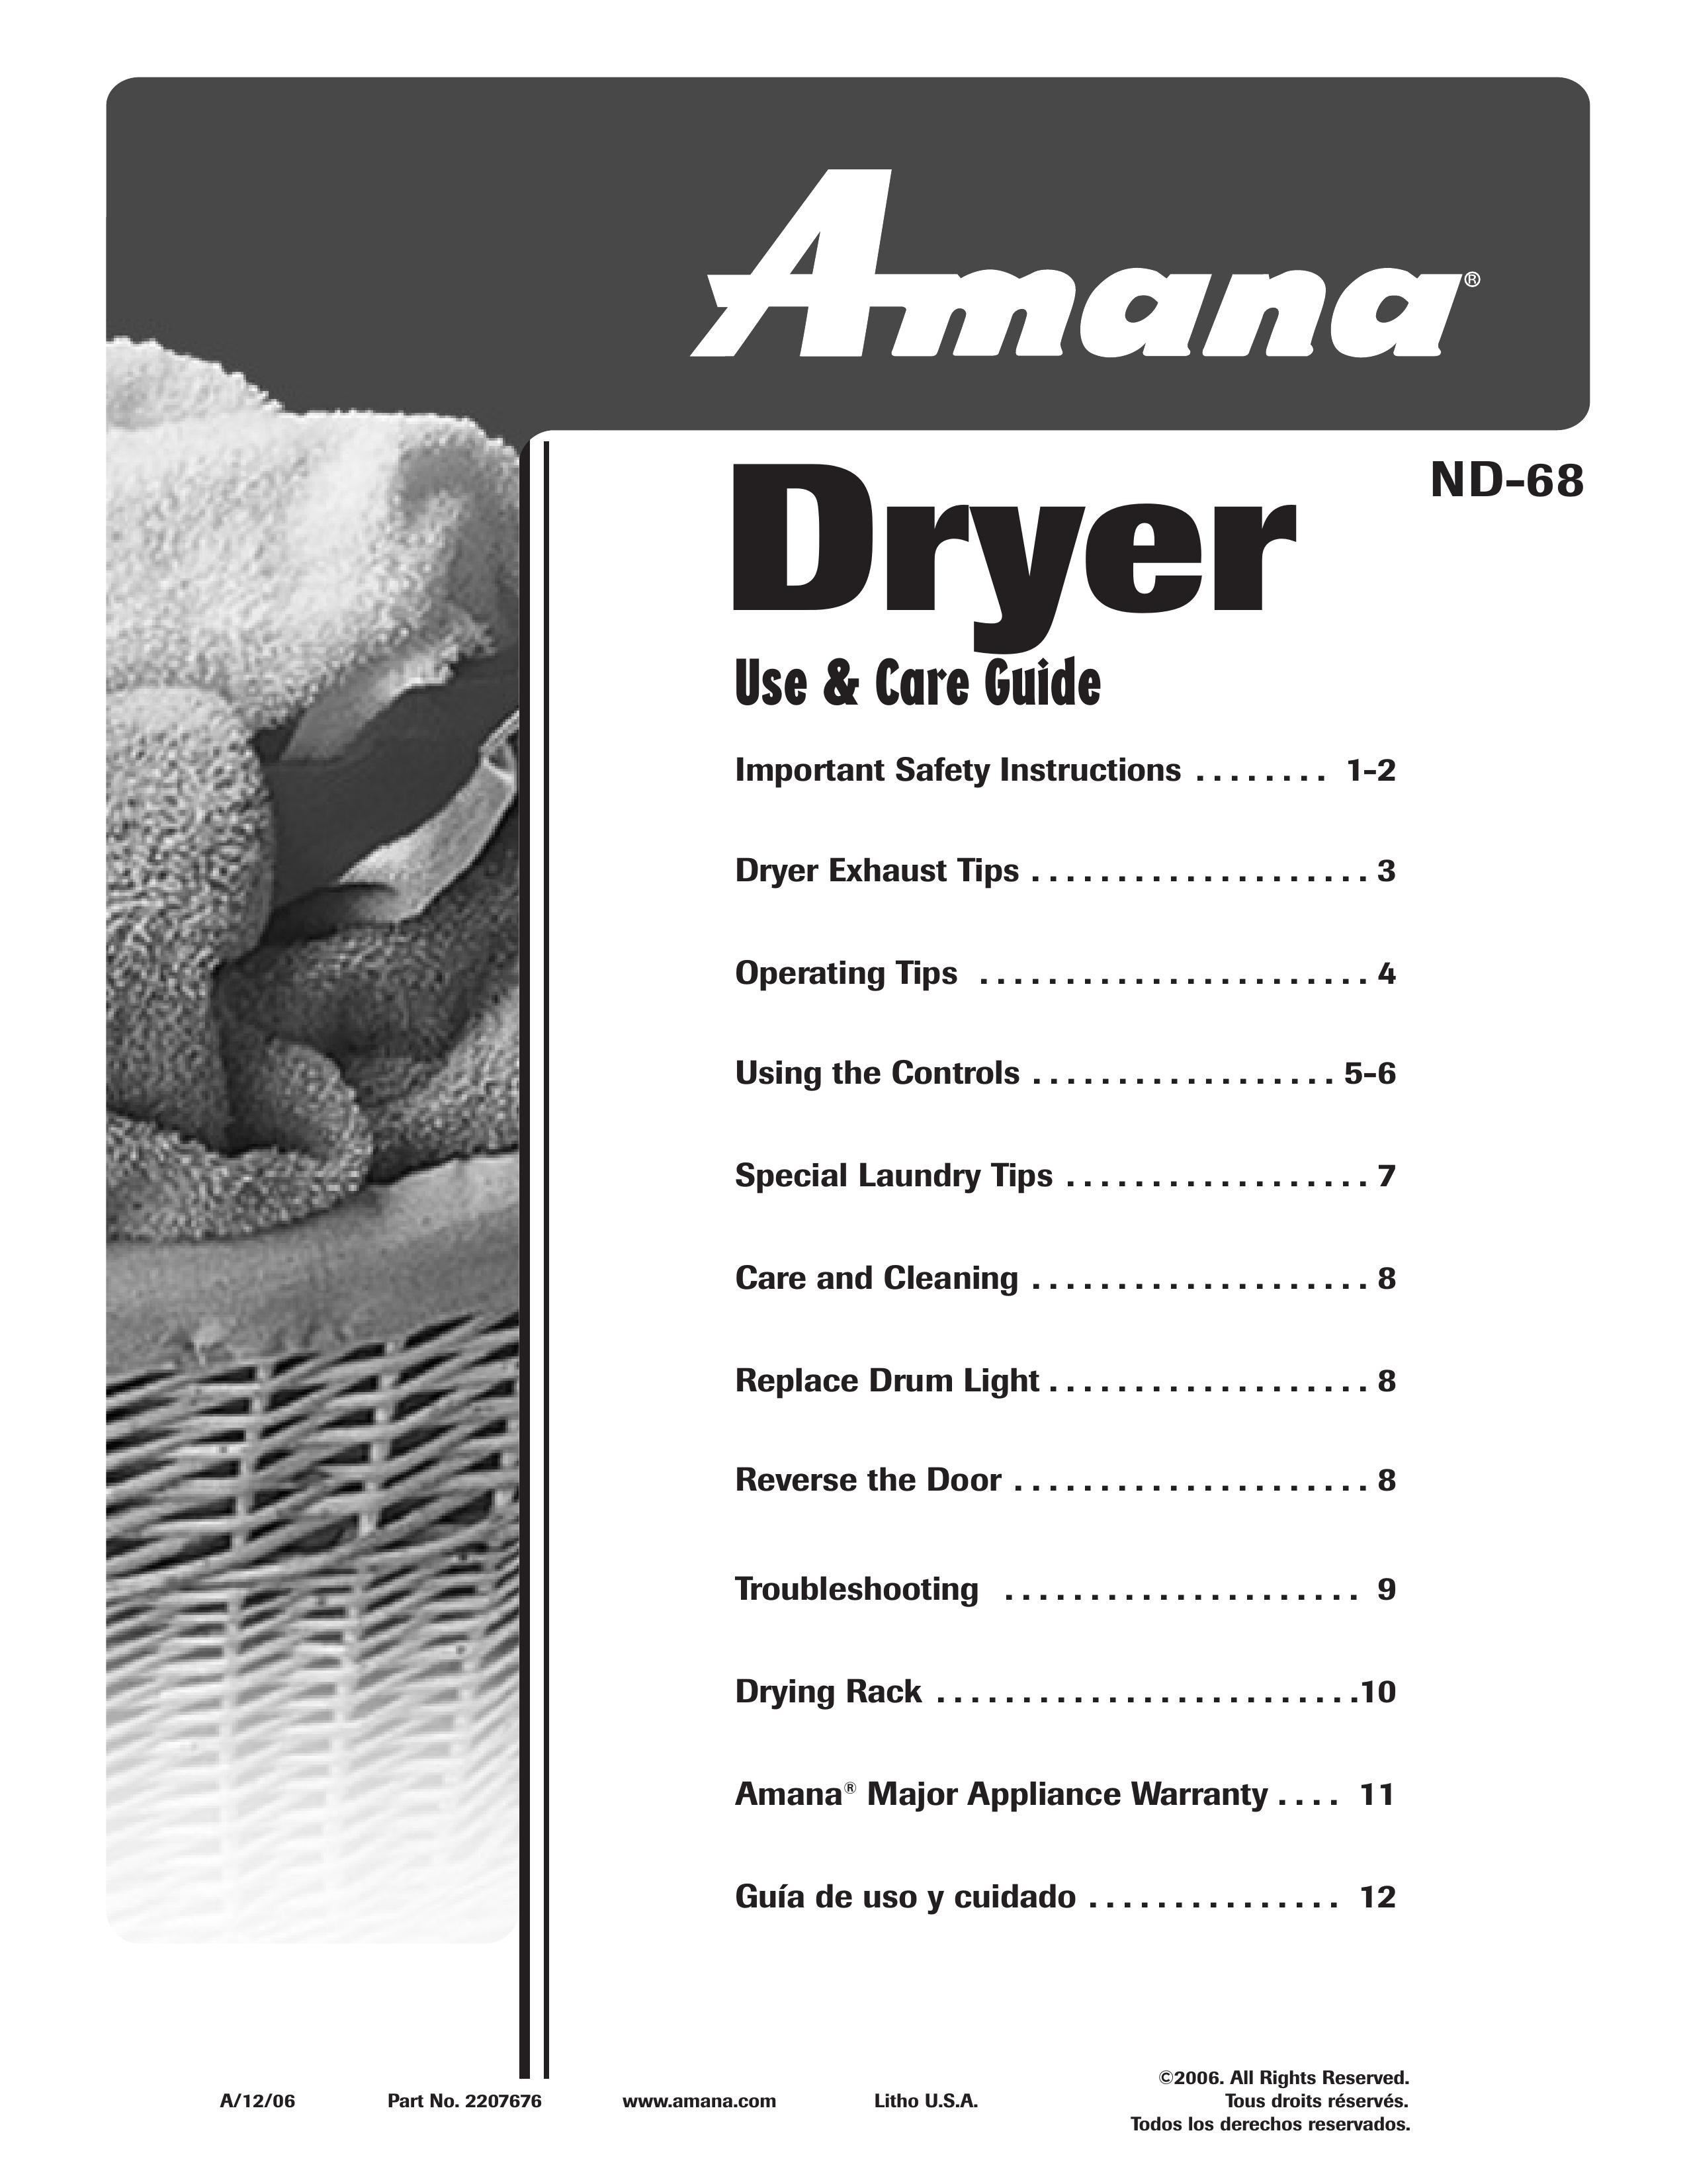 Amana ND-68 Clothes Dryer User Manual